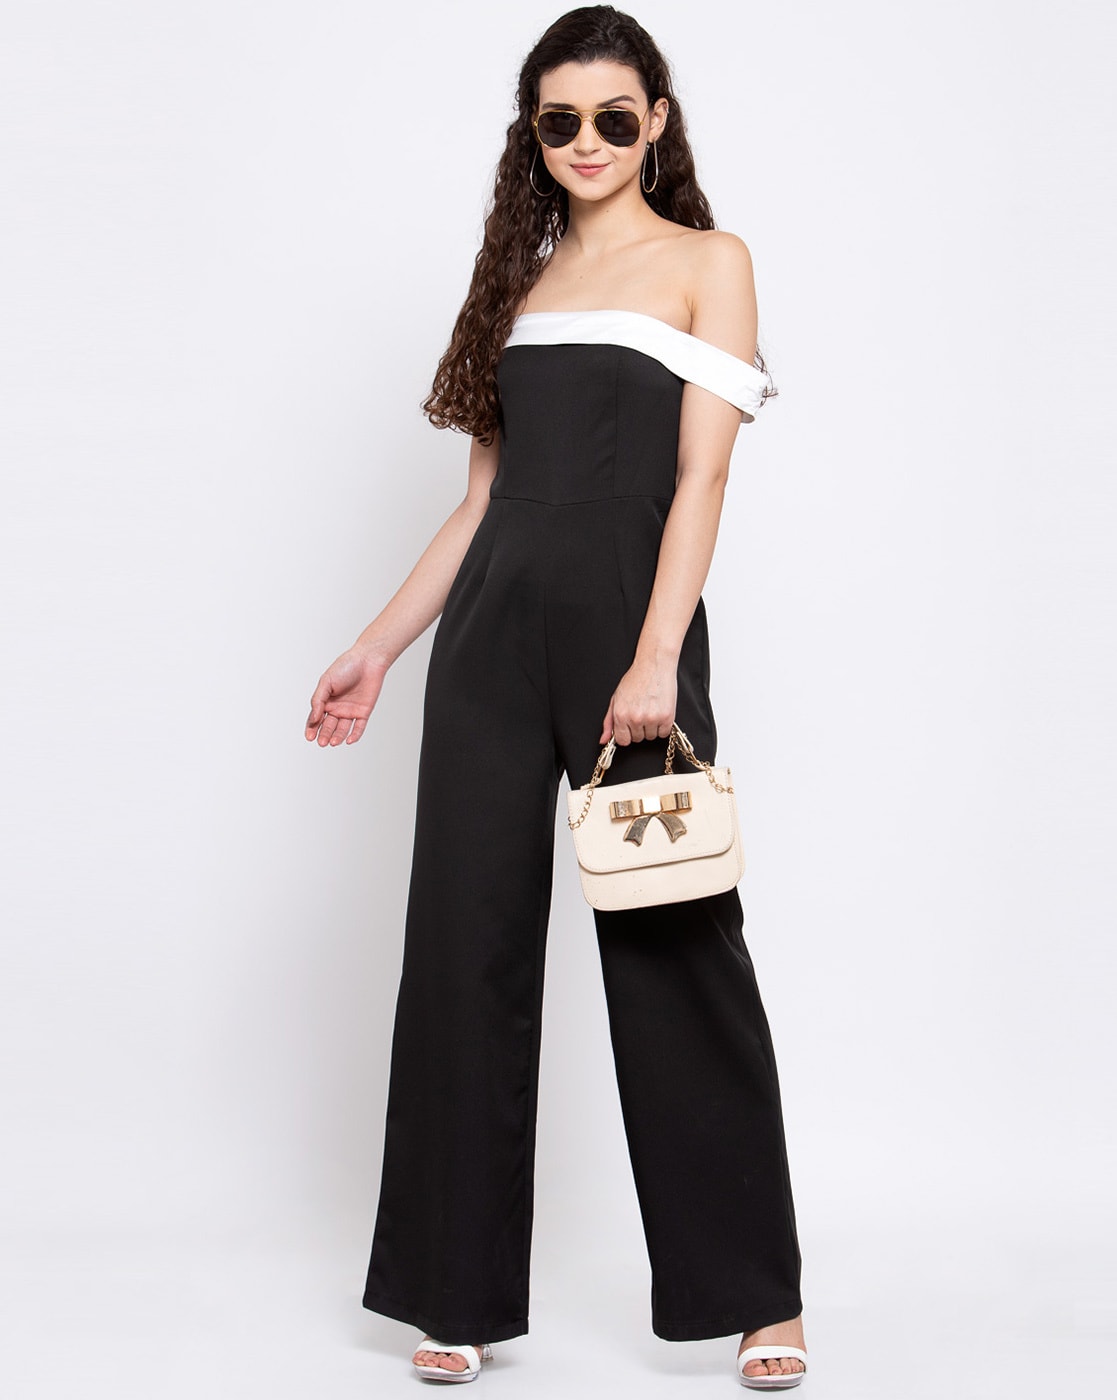 This jumpsuit is a winner for me! I need it in every style! @OEAK